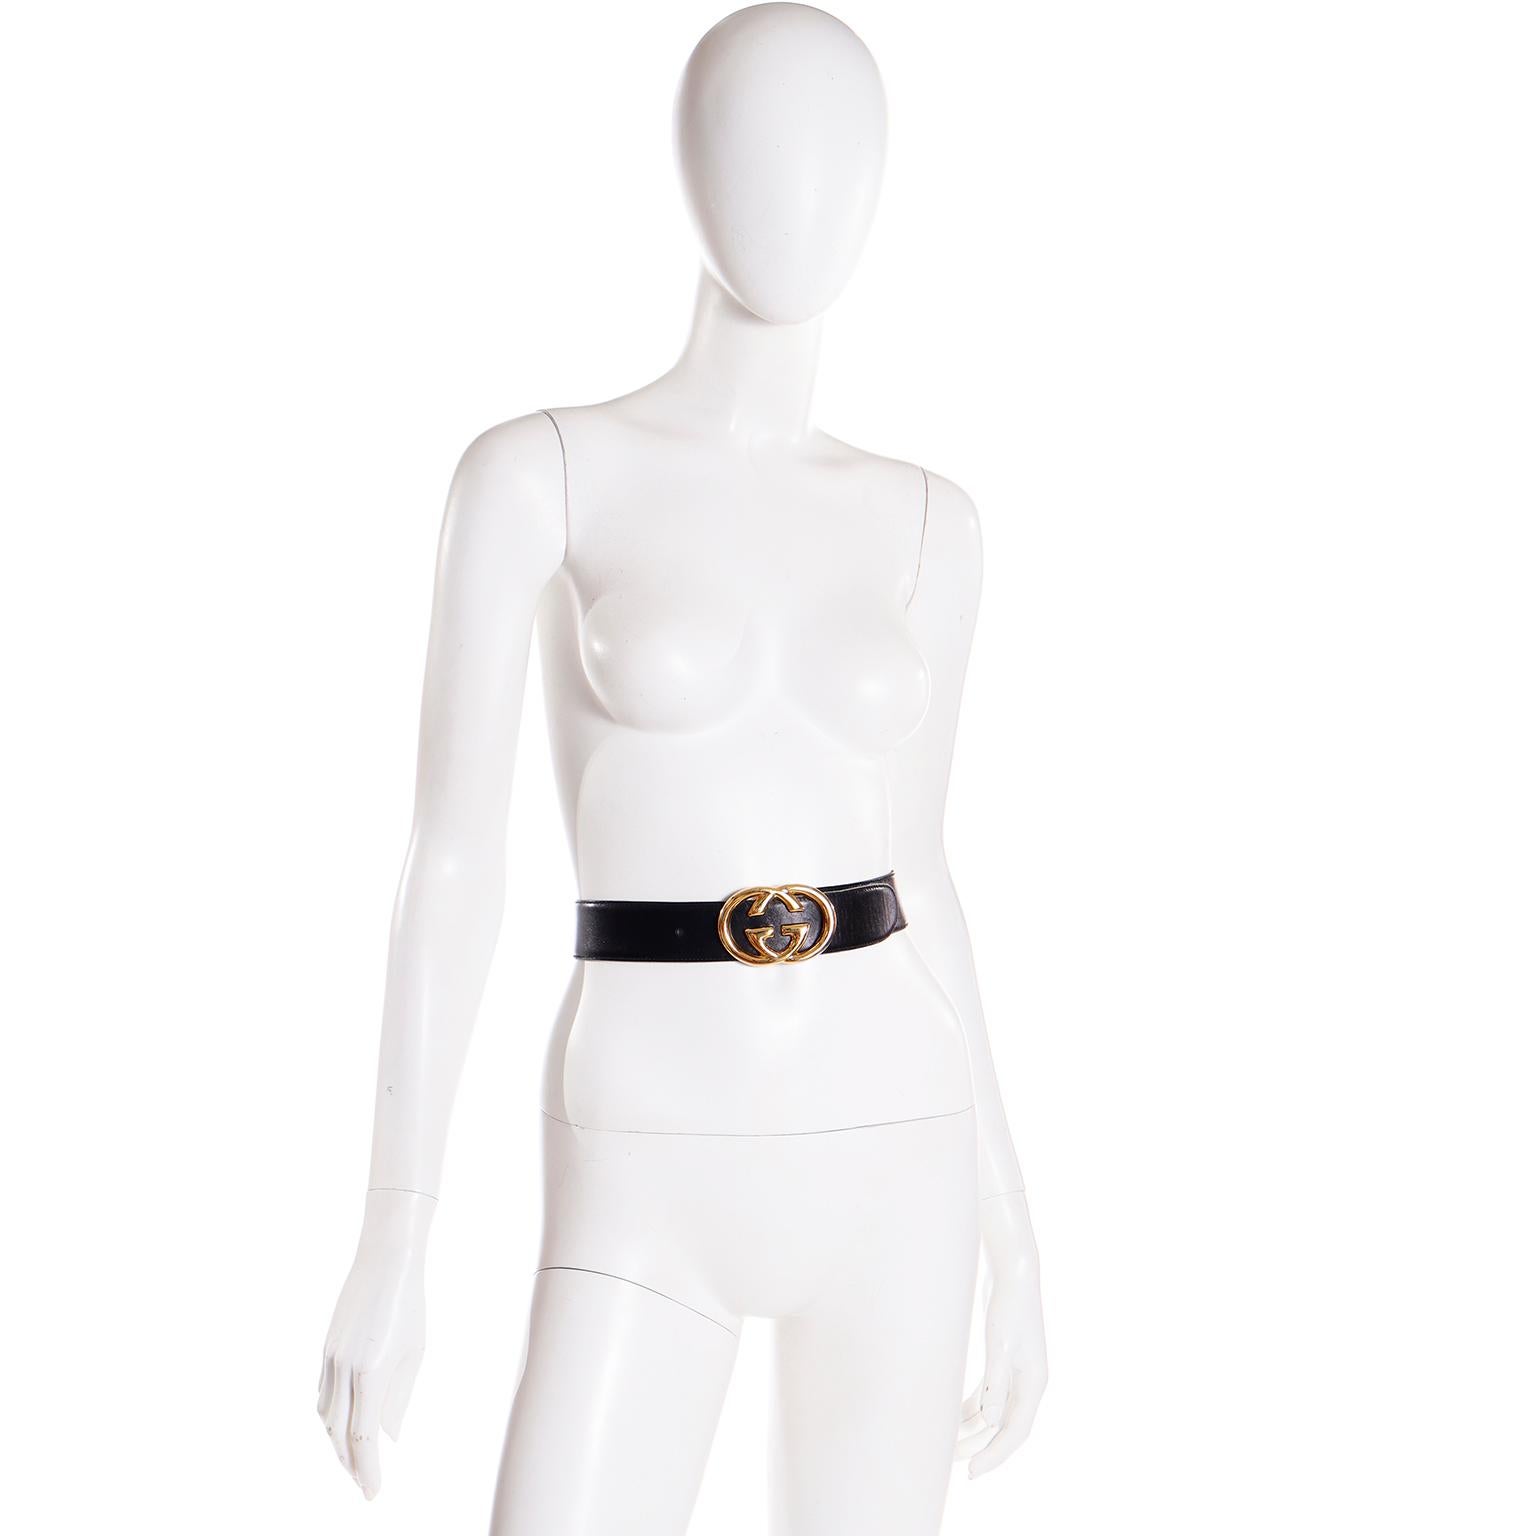 This vintage late 1980's black leather Gucci belt is so timeless and can add so much style to any outfit! We especially love the large interlocking mirror image double G gold metal buckle! The belt is marked Made in Italy by Gucci 75-30. The buckle